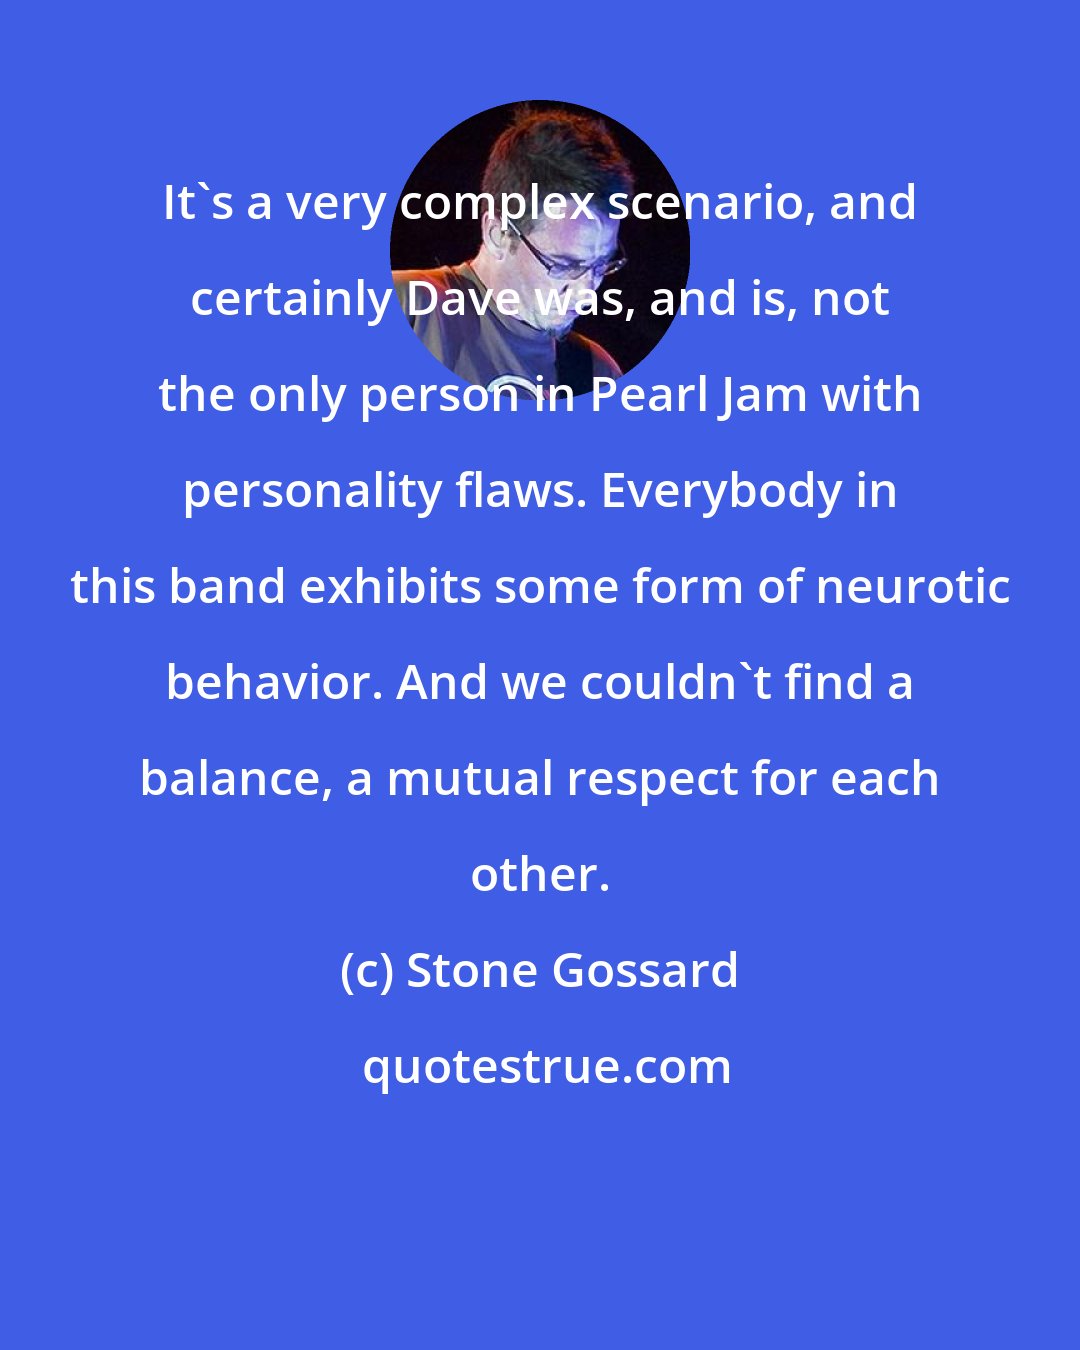 Stone Gossard: It's a very complex scenario, and certainly Dave was, and is, not the only person in Pearl Jam with personality flaws. Everybody in this band exhibits some form of neurotic behavior. And we couldn't find a balance, a mutual respect for each other.